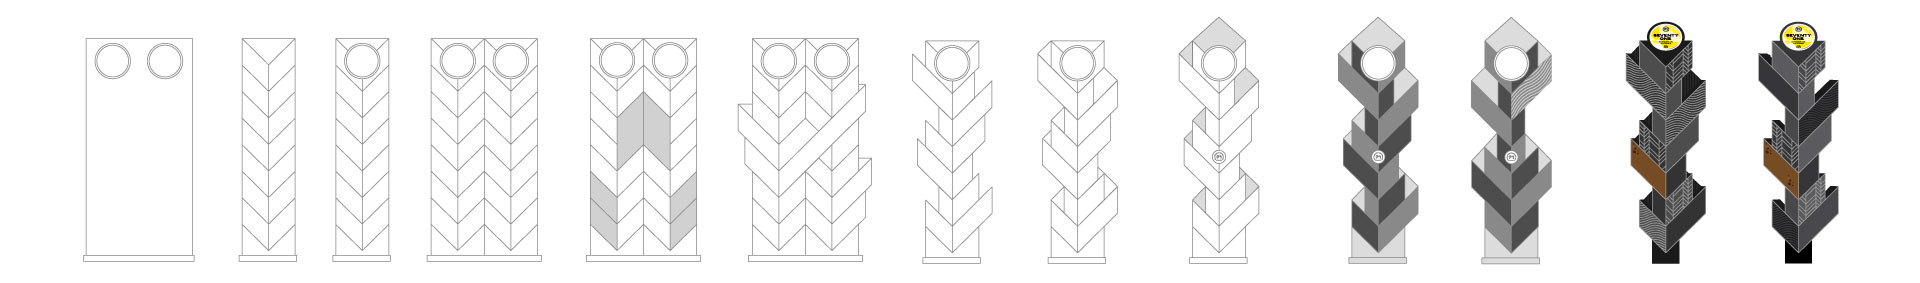 Seeries of sketches and illustrations detailing the design and development of custom beer taps. Sharp and angular in style with beer logos on top.